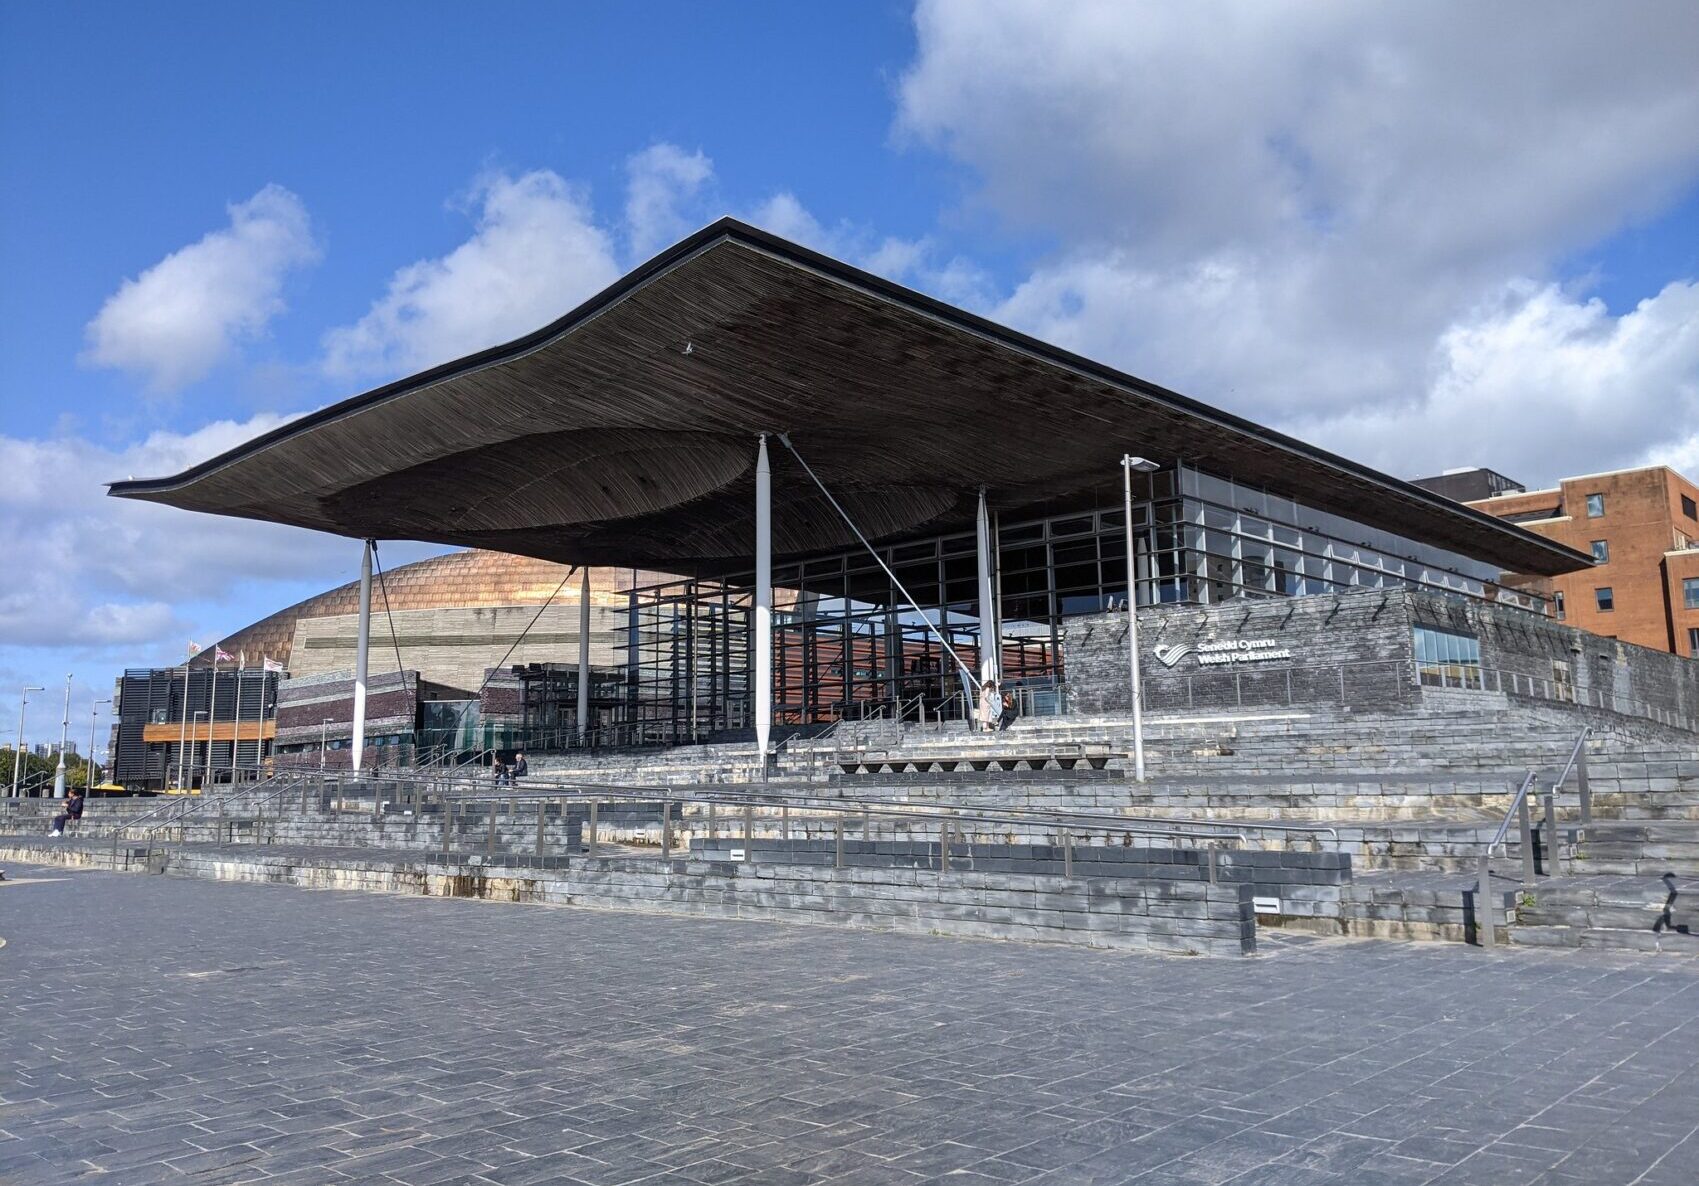 A picture of the Senedd, seen from afar